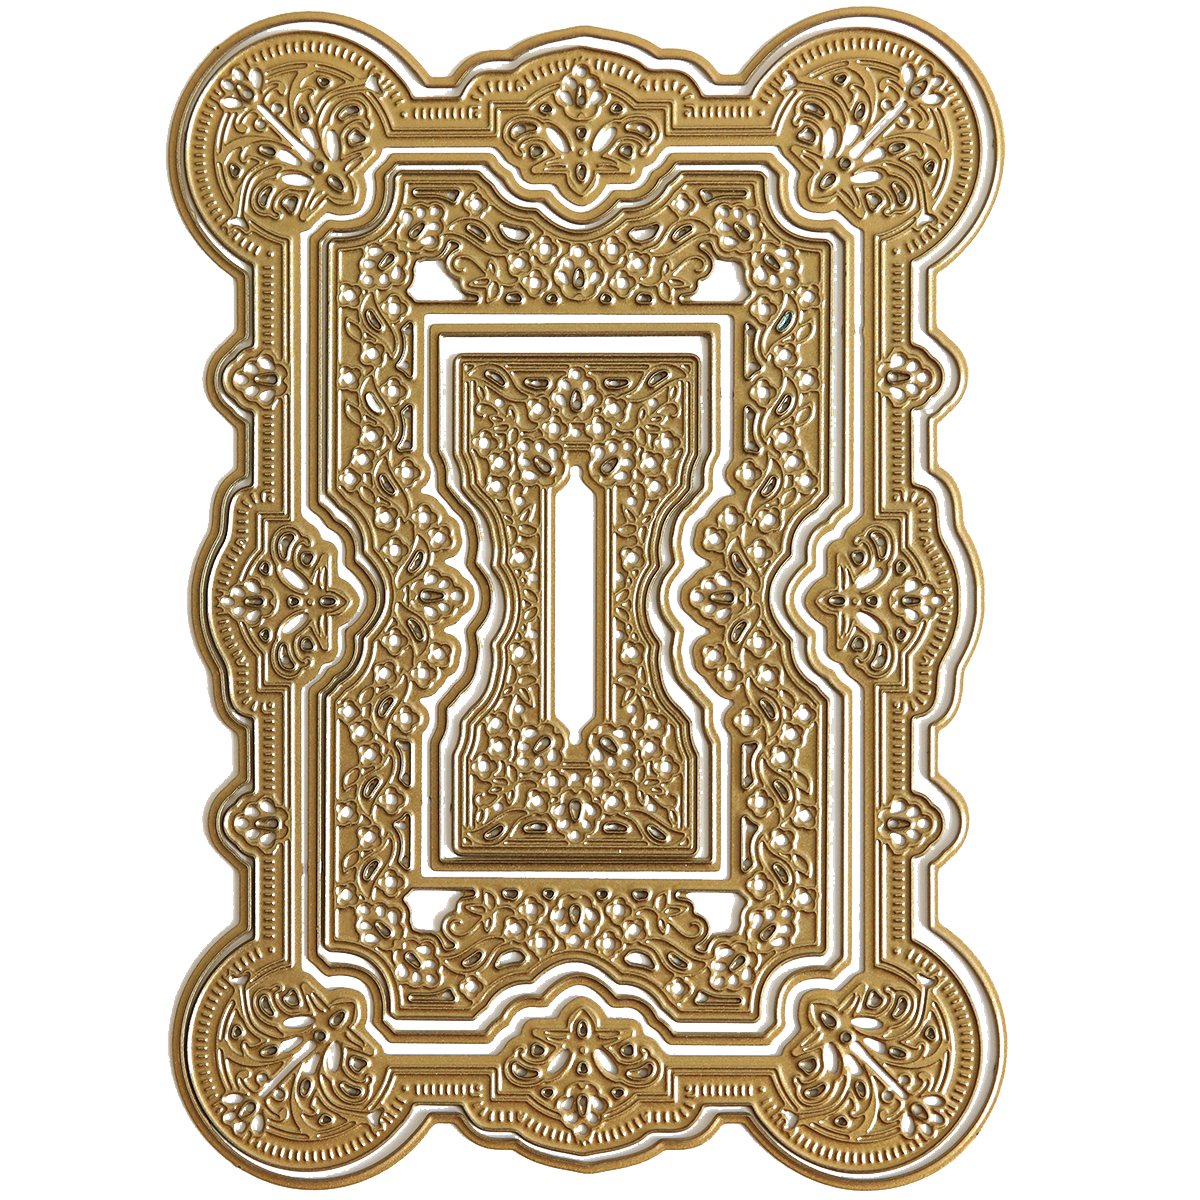 An ornate gold light switch plate with a Victorian Christmas Dies design.